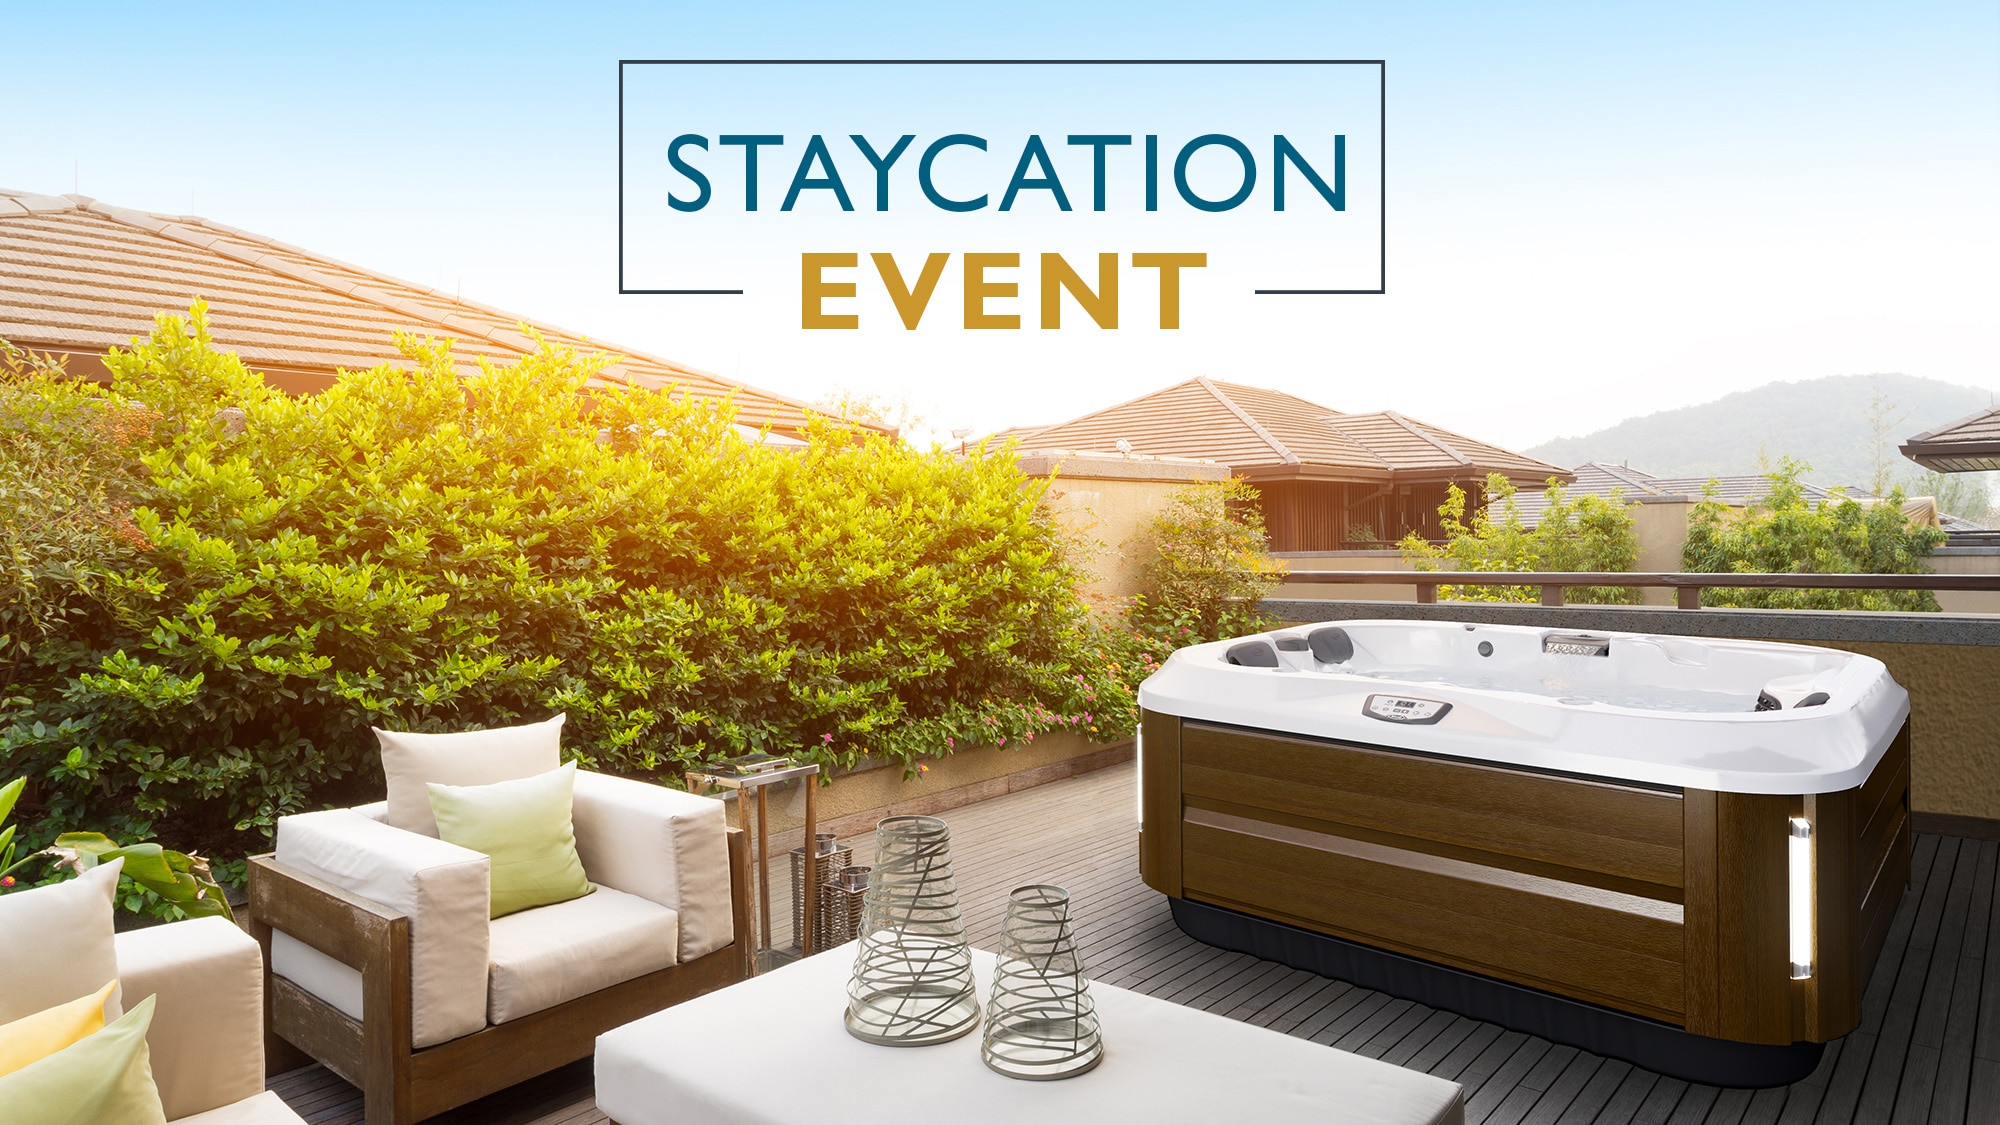 Jacuzzi Staycation Event